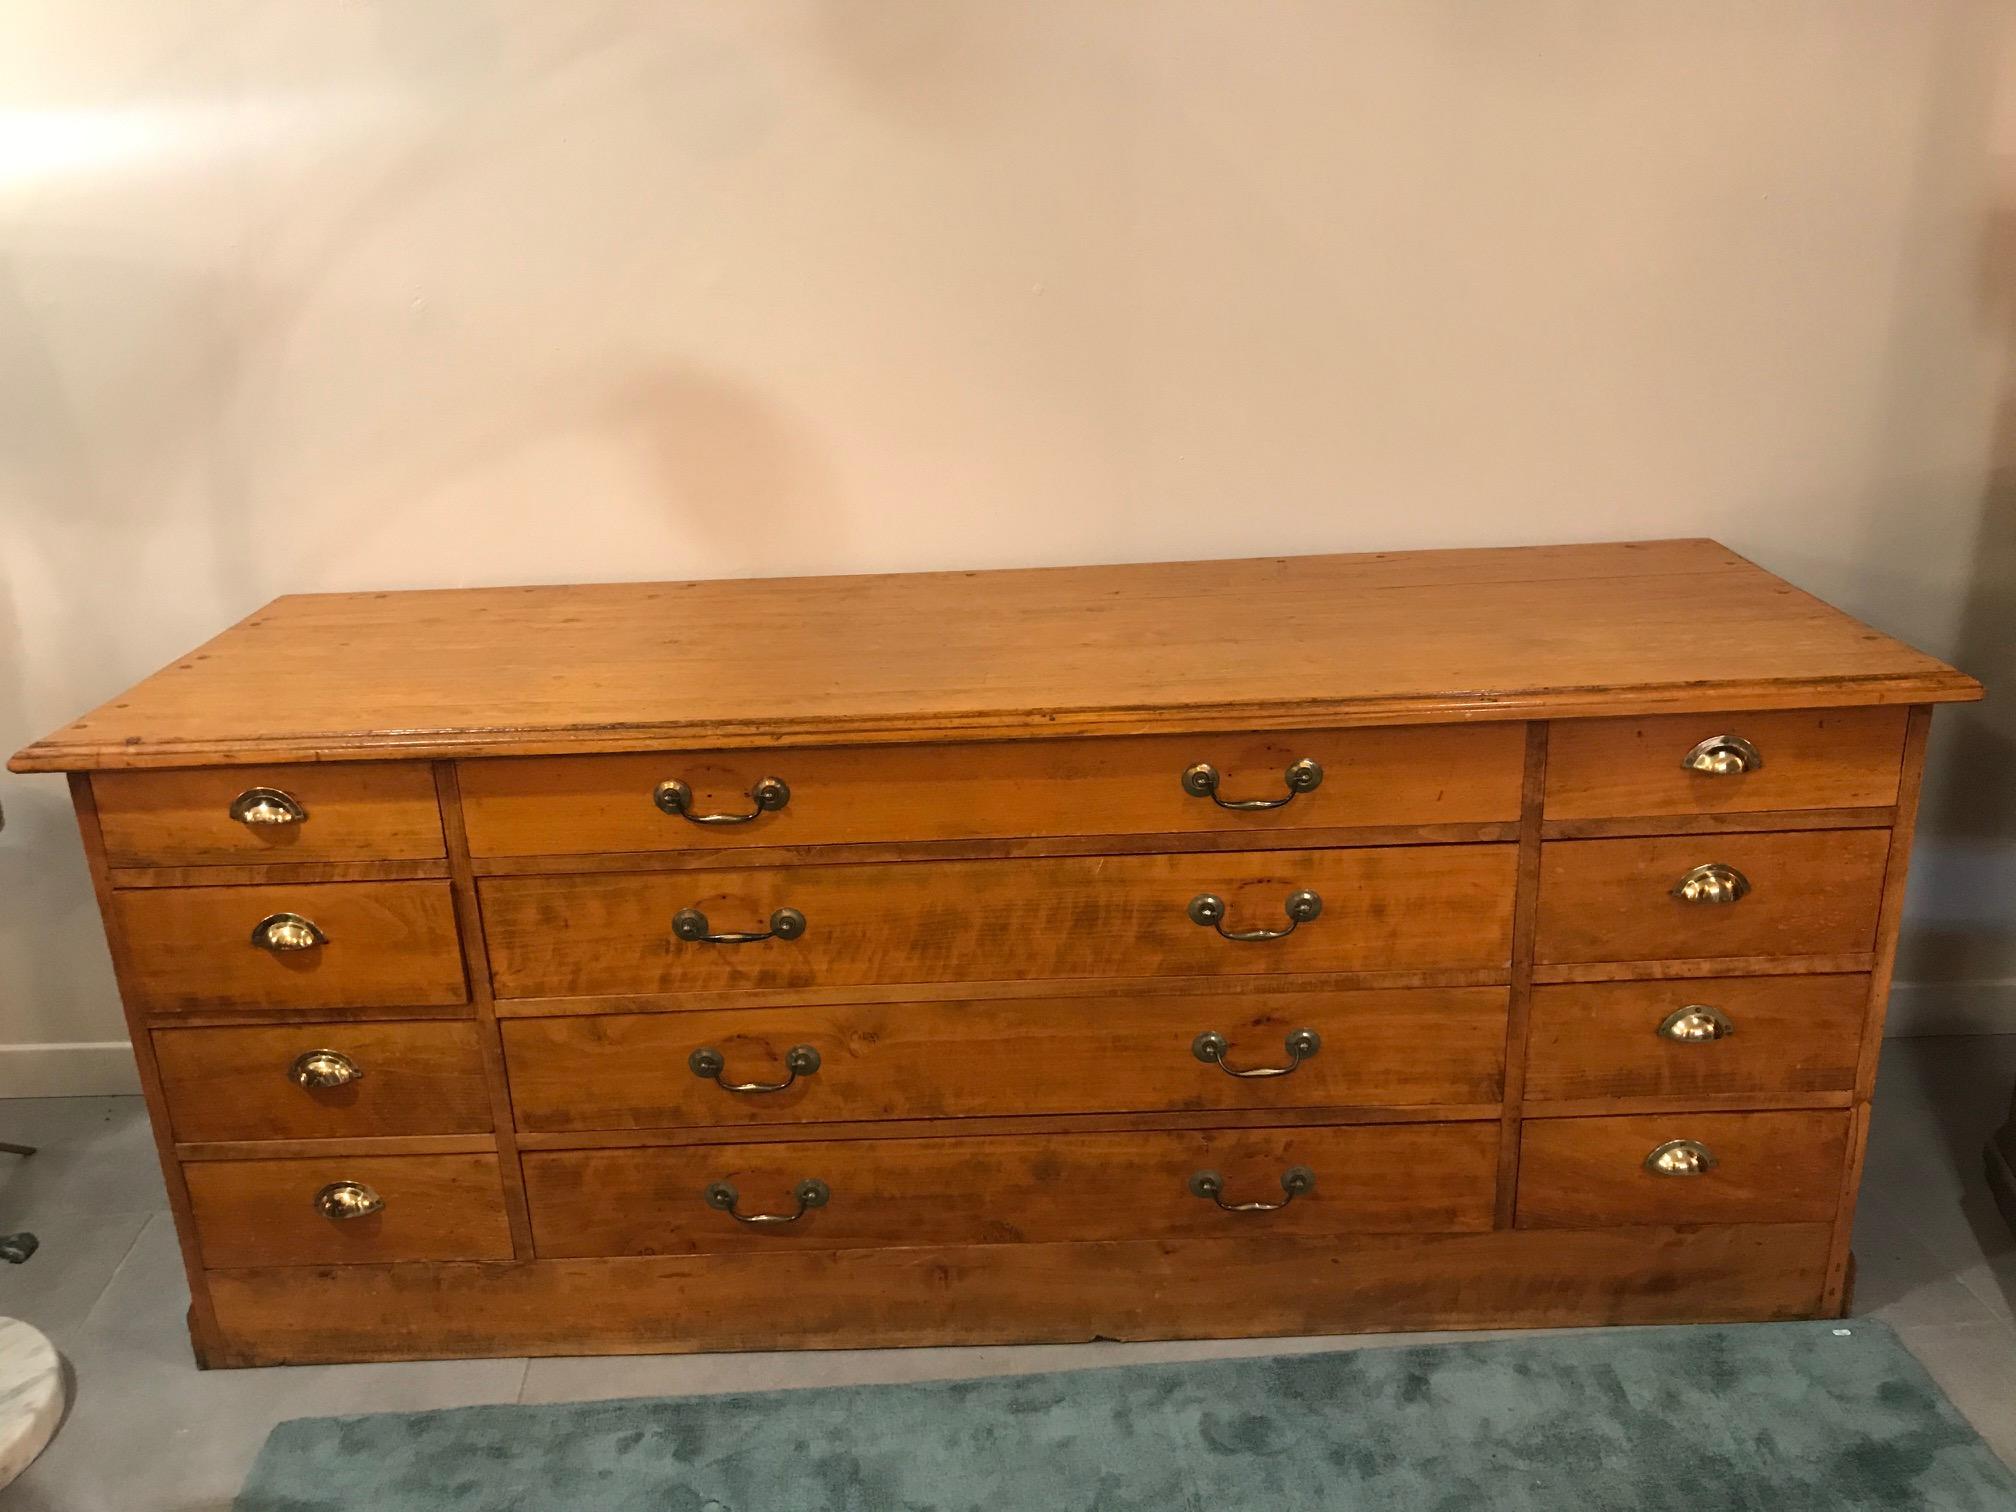 Beautiful 20th century French beech chests of drawer from the 1920s.
Gilded brass handles. Four large drawers in the middle and eight smaller drawer at the extremities. Very nice quality. This kind of furniture use to be in shop to exposed